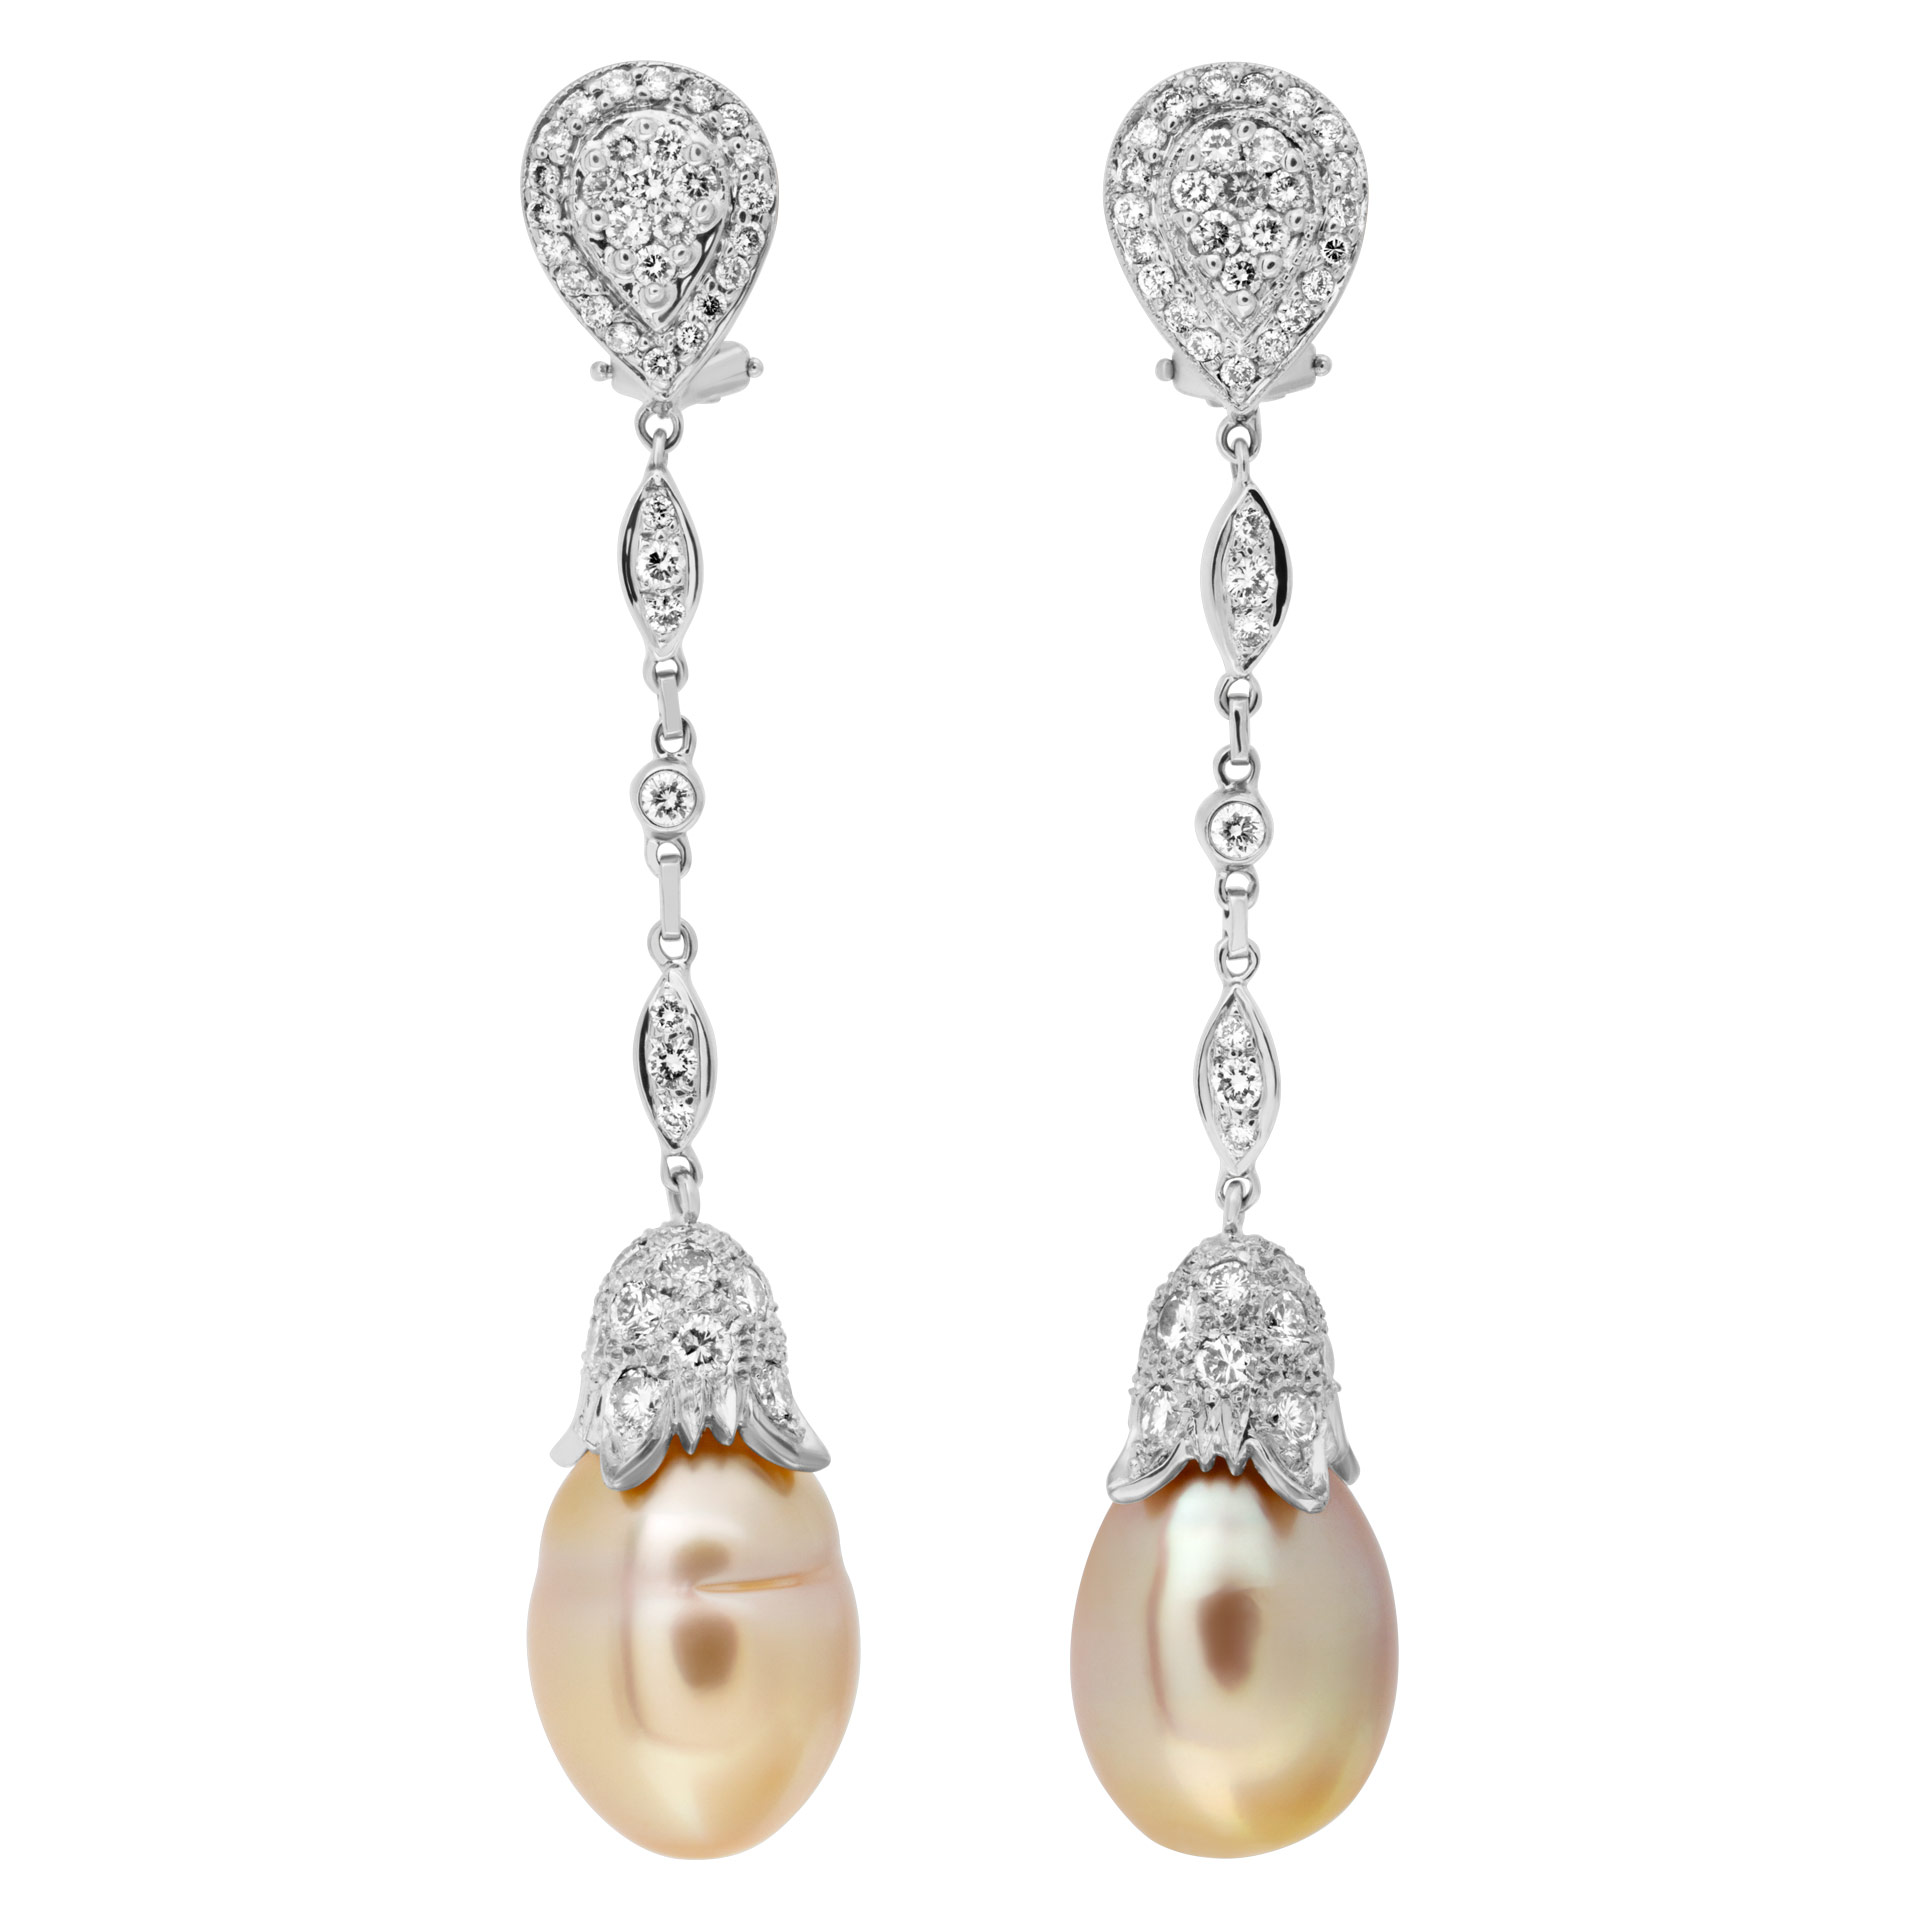 Rare pair of natural drop Golden South Sea Pearl earrings with diamonds in 18k whit gold image 1